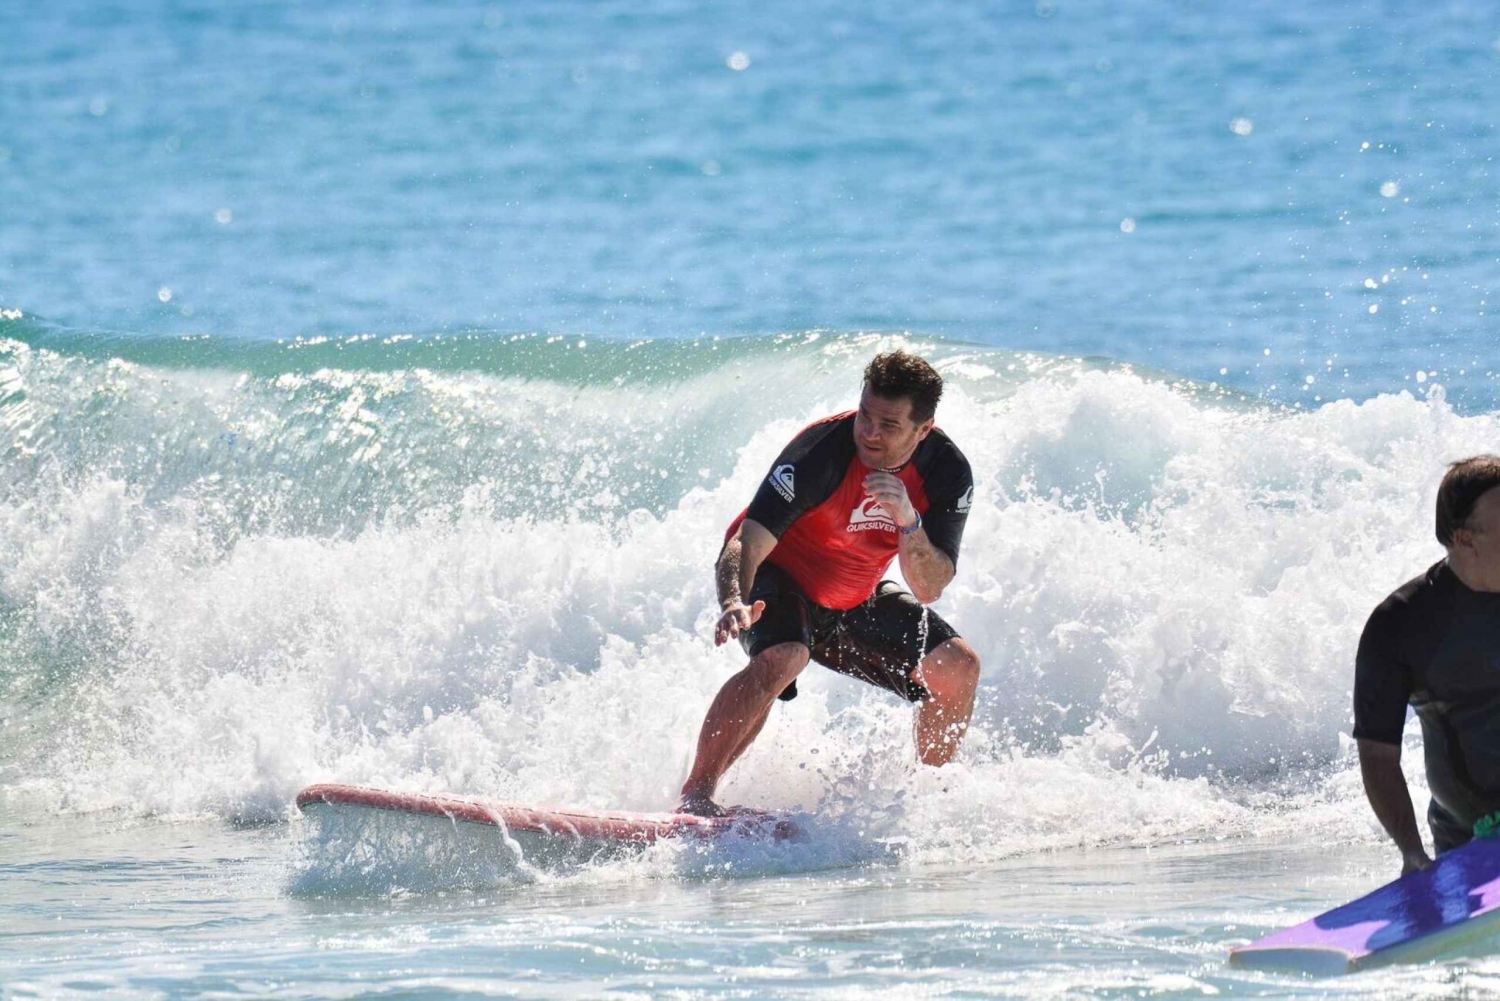 Cerritos Beach: Private Surfing Lessons with Instructors